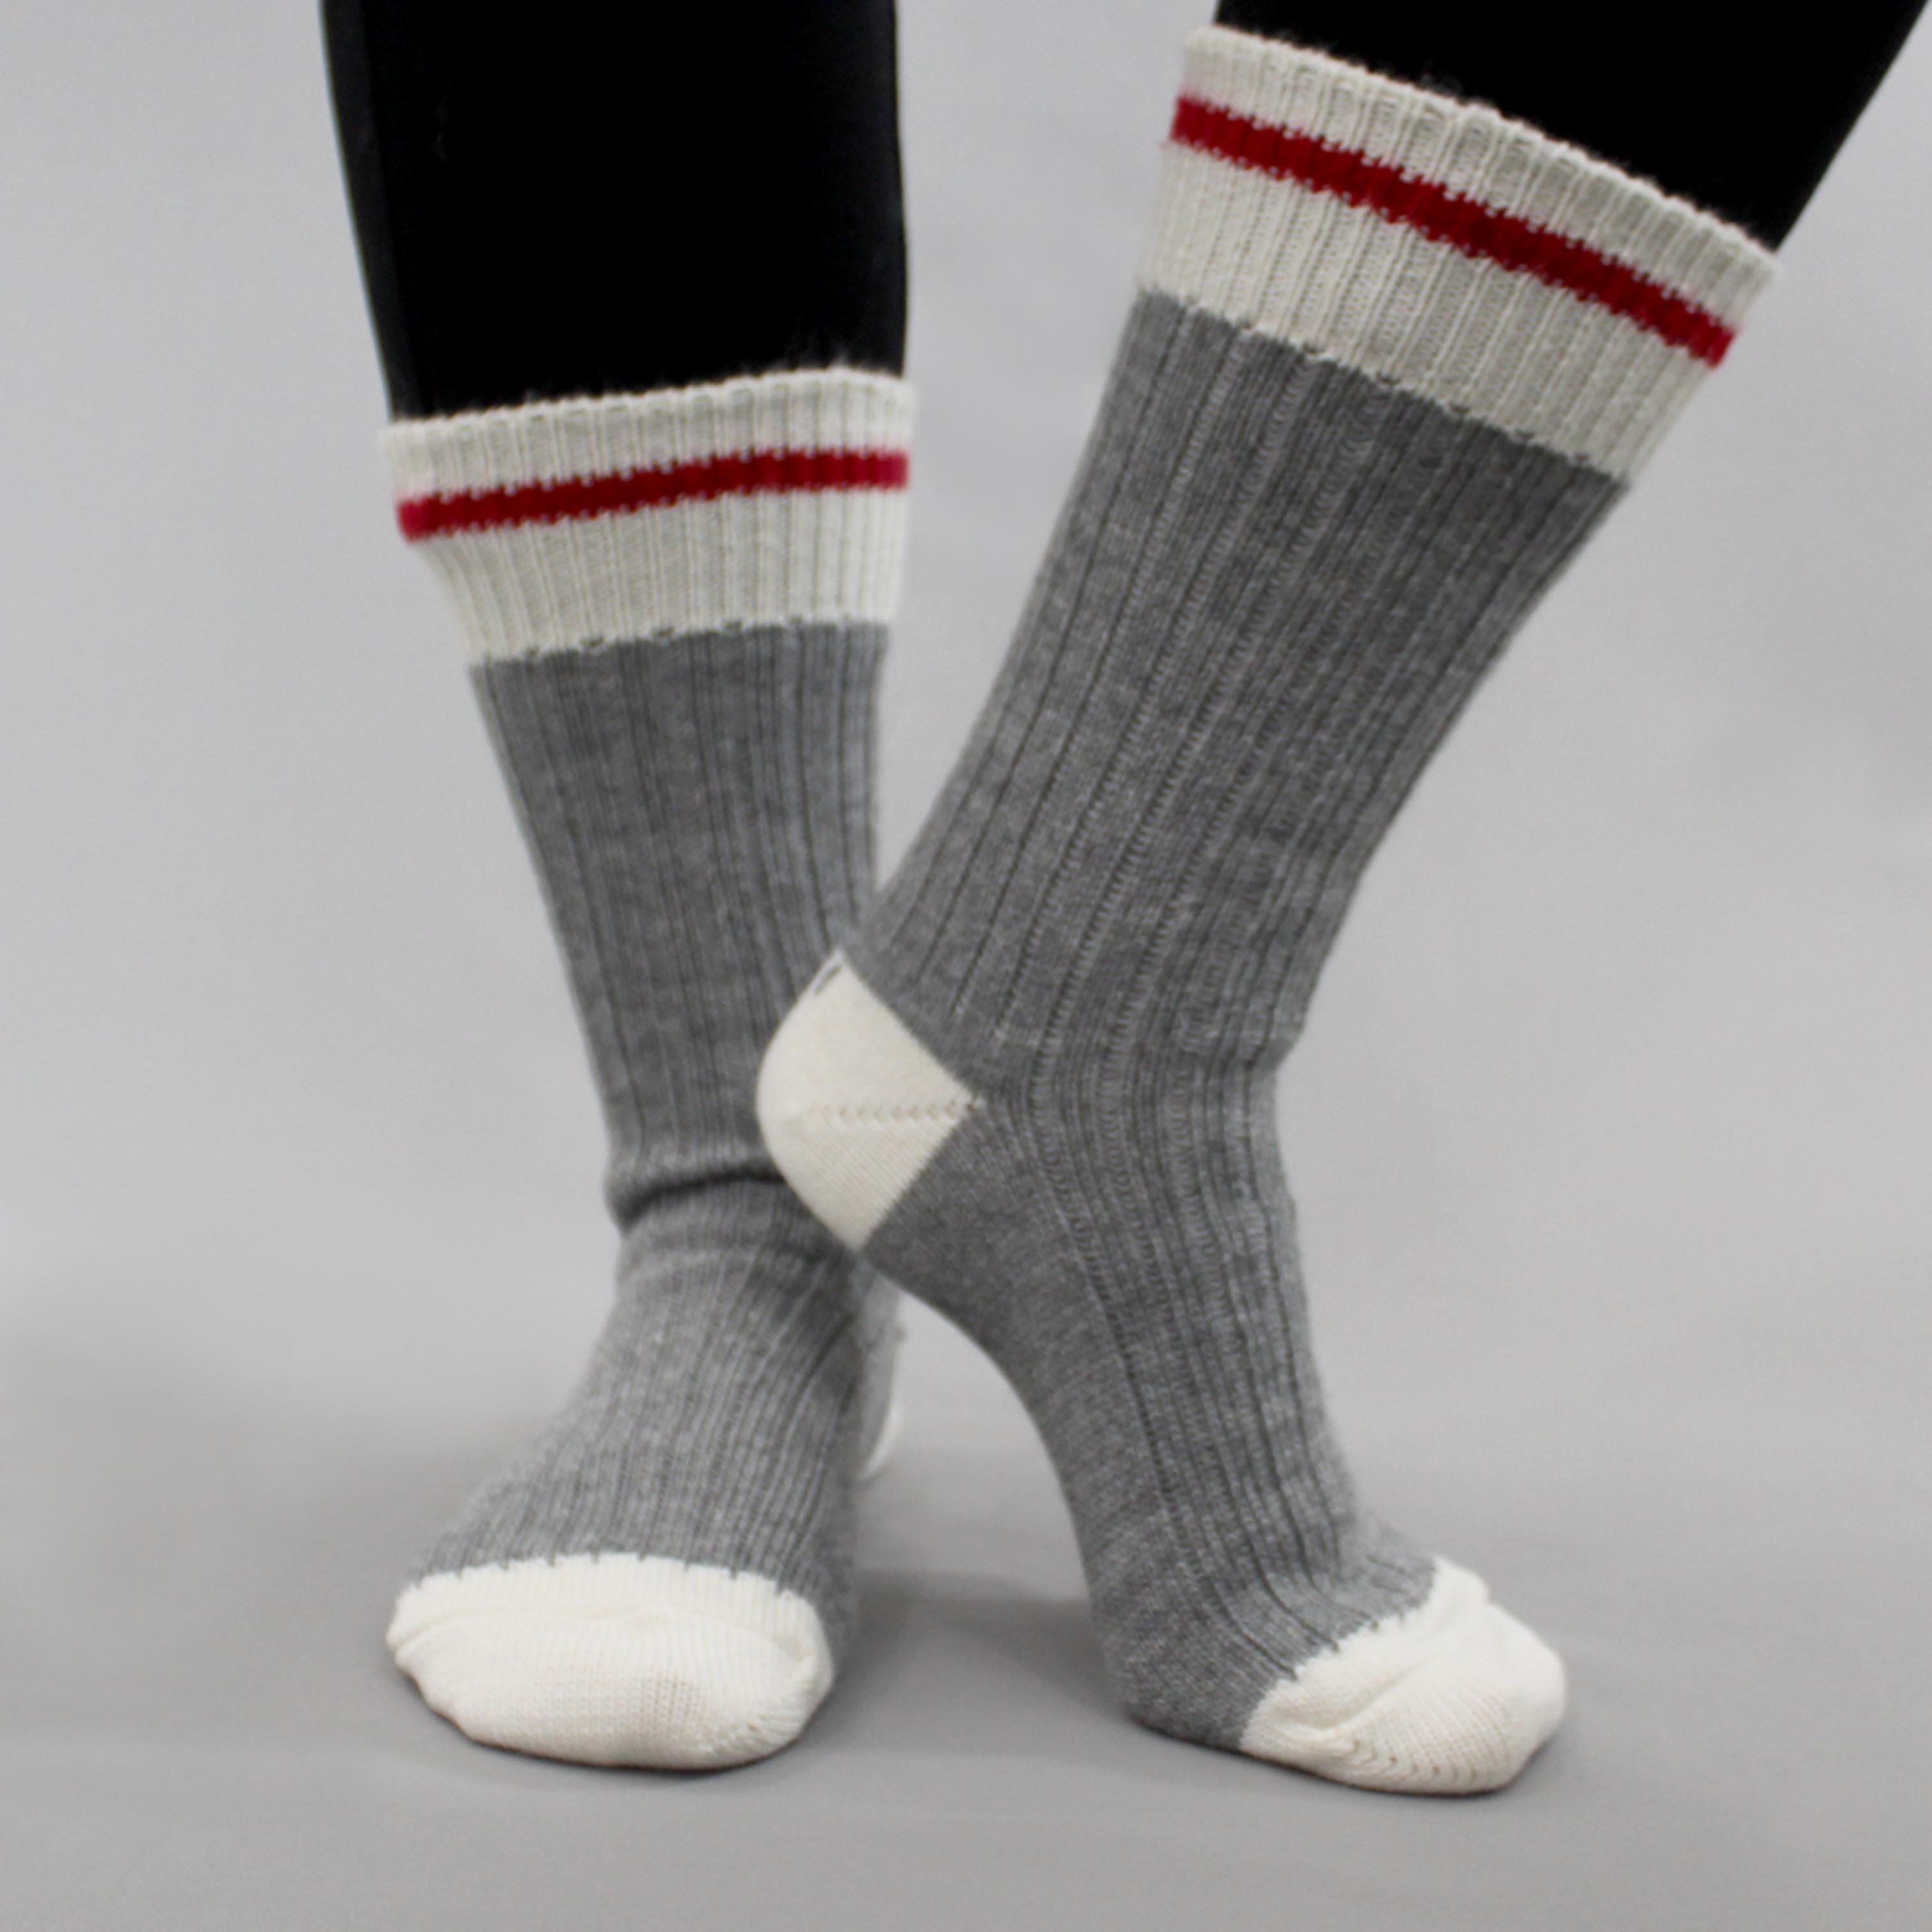 Soft Wool Blend Socks. Best Quality Work Made in Canada. Hygge Wear. Mother's Or Father's Day Gift Stocking Stuffer